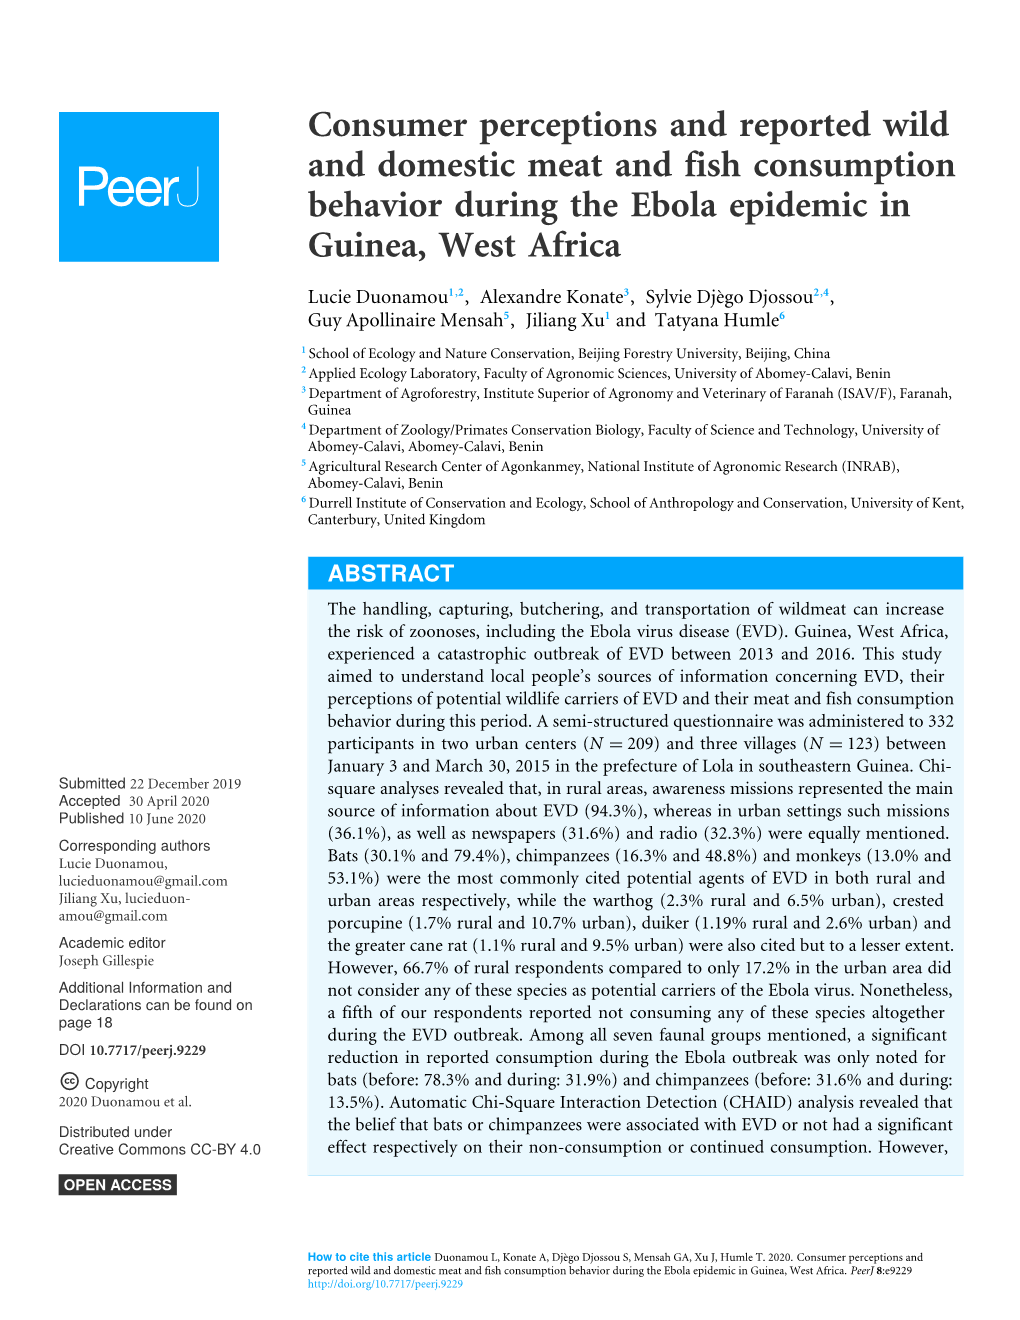 Consumer Perceptions and Reported Wild and Domestic Meat and Fish Consumption Behavior During the Ebola Epidemic in Guinea, West Africa